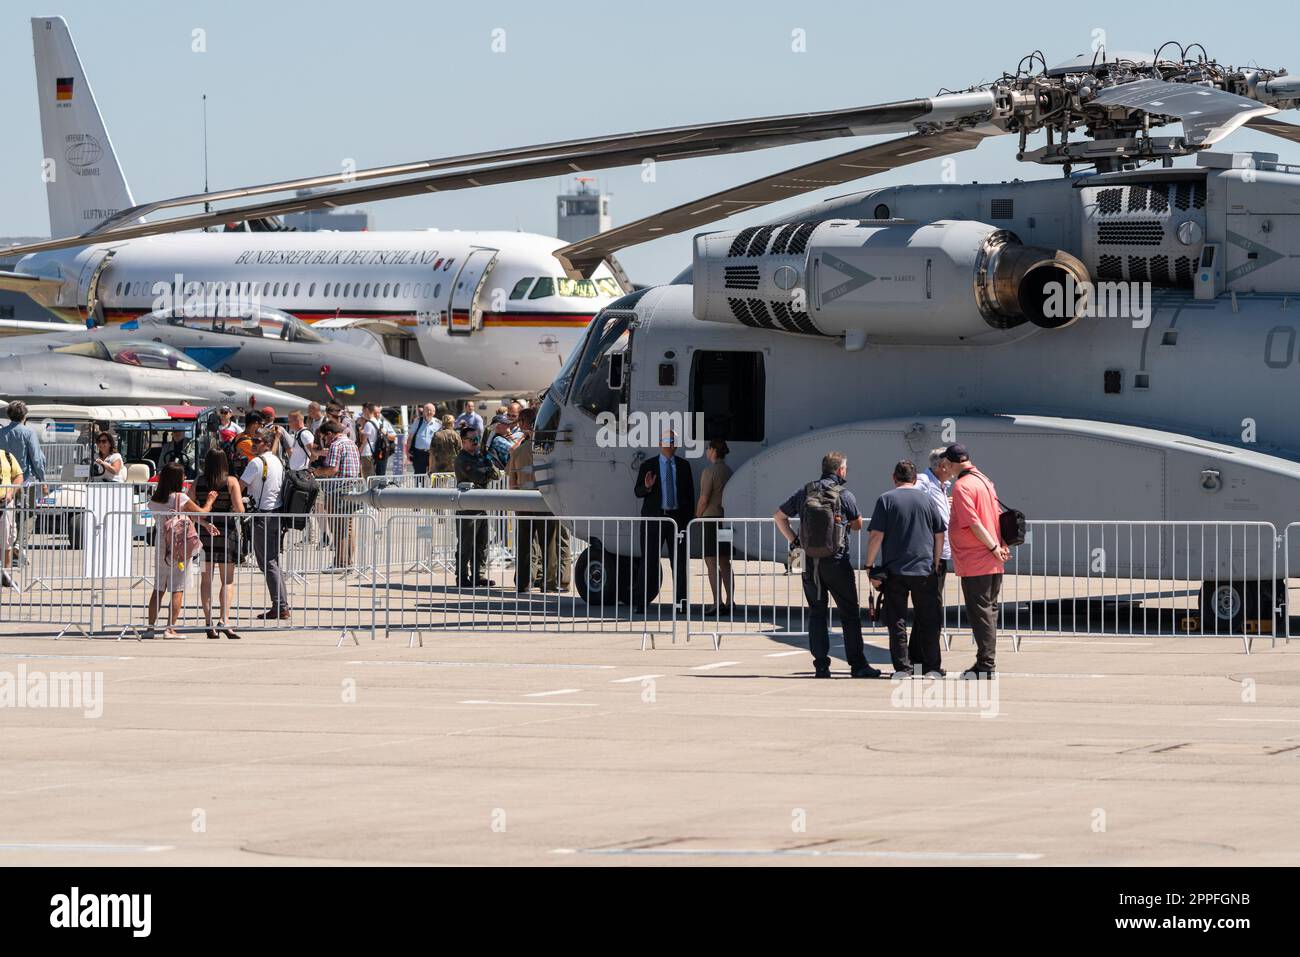 BERLIN, GERMANY - JUNE 23, 2022: Visitors to the exhibition on the airfield against the backdrop of various aircraft. Exhibition ILA Berlin Air Show 2022 Stock Photo